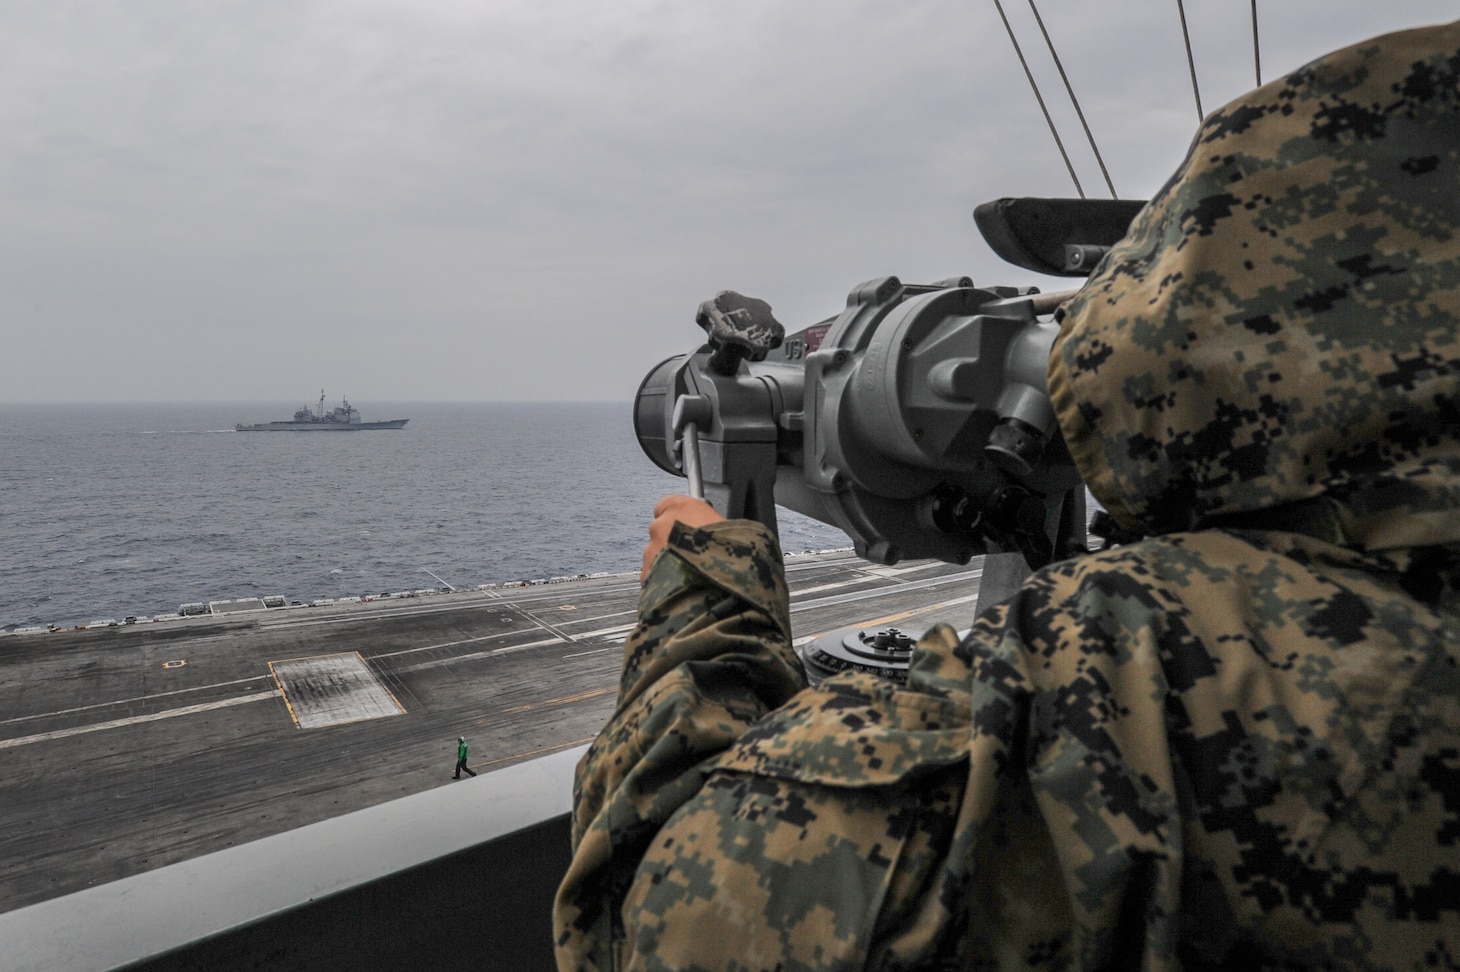 PHILIPPINE SEA (October 10, 2018) Seaman Esmeralda Anaya, from Waterbury, Connecticut, stands lookout watch aboard the Navy's forward-deployed aircraft carrier USS Ronald Reagan (CVN 76) during a cooperative deployment with the Japan Air Self-Defense Force. Ronald Reagan, the flagship of Carrier Strike Group 5, provides a combat-ready force that protects and defends the collective maritime interests of its allies and partners in the Indo-Pacific region.